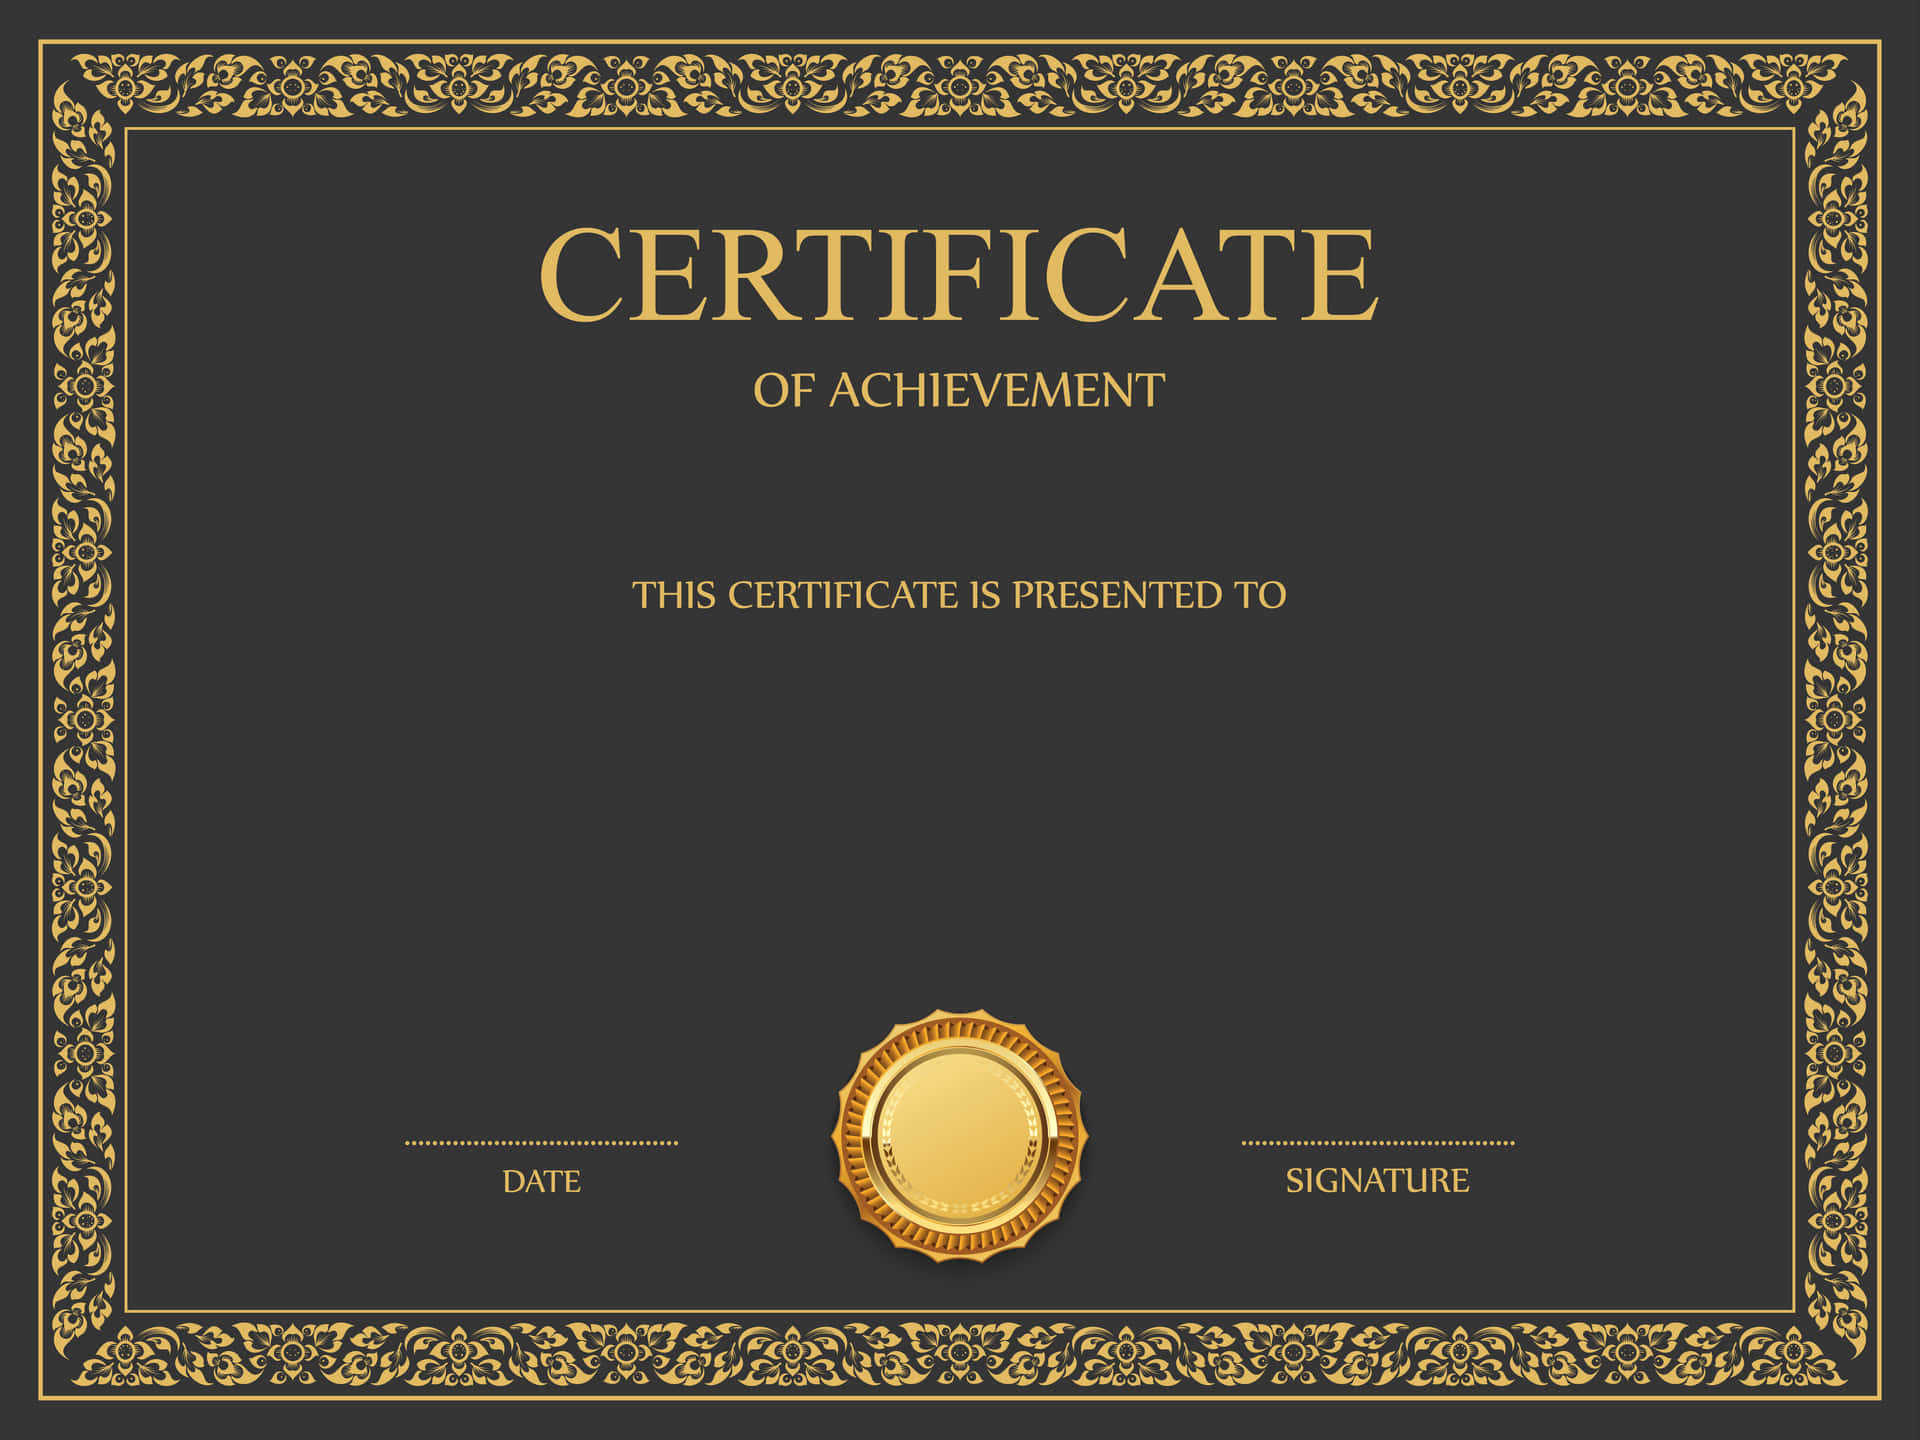 An official certificate for all types of recognition.